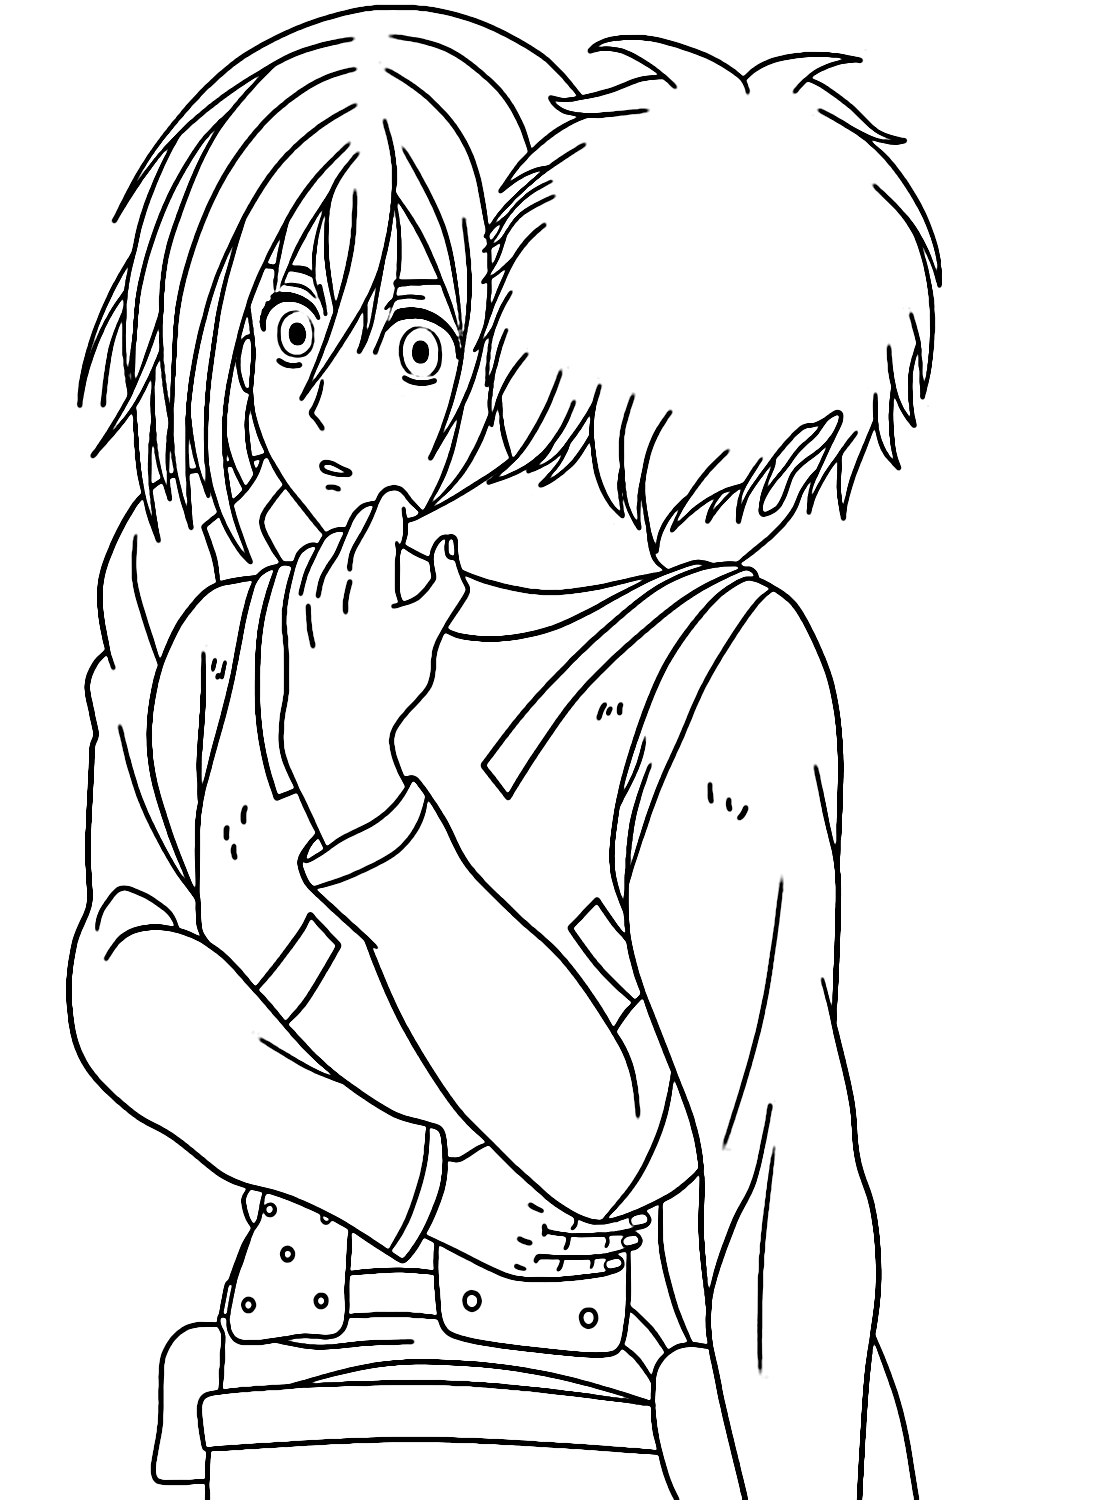 Mikasa and Eren Coloring Page